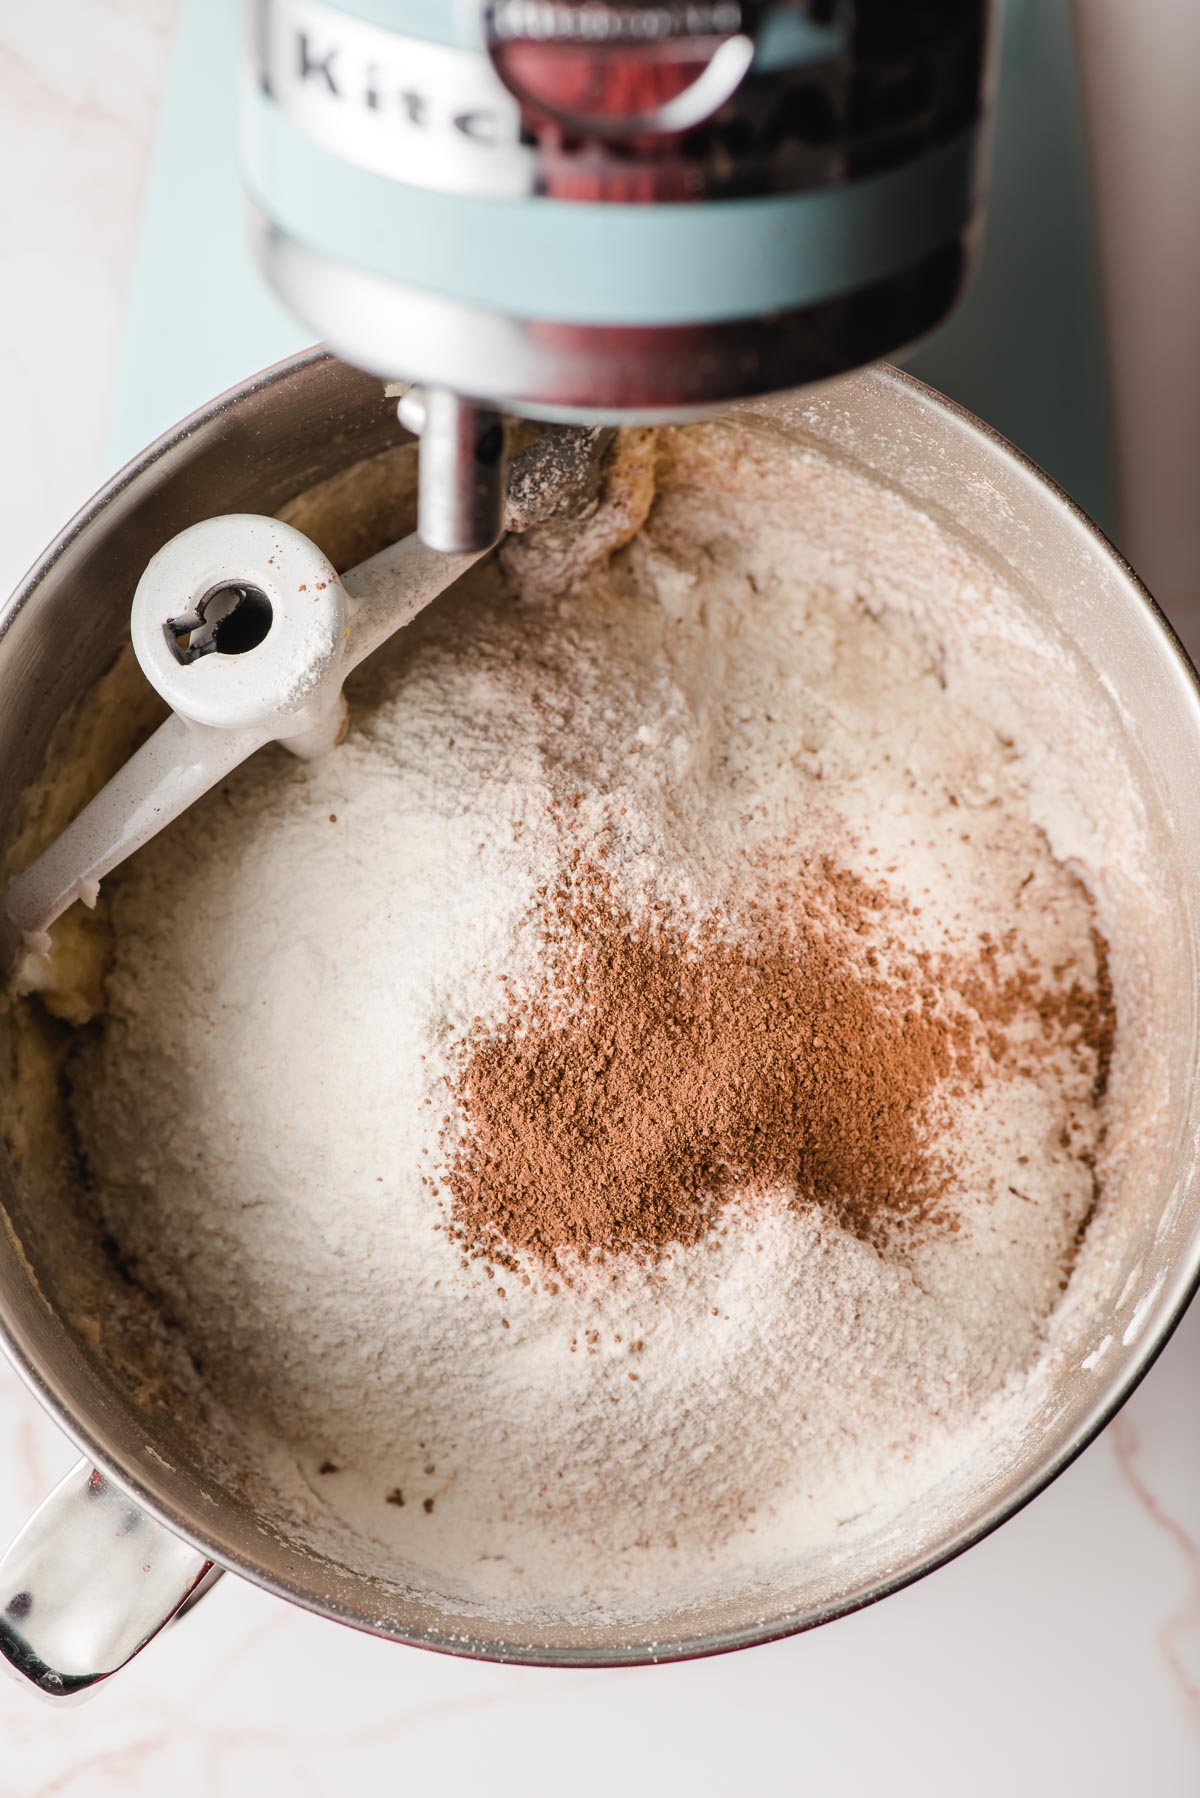 Flour, cocoa, and other dry ingredients being mixed into whoopie pie batter.